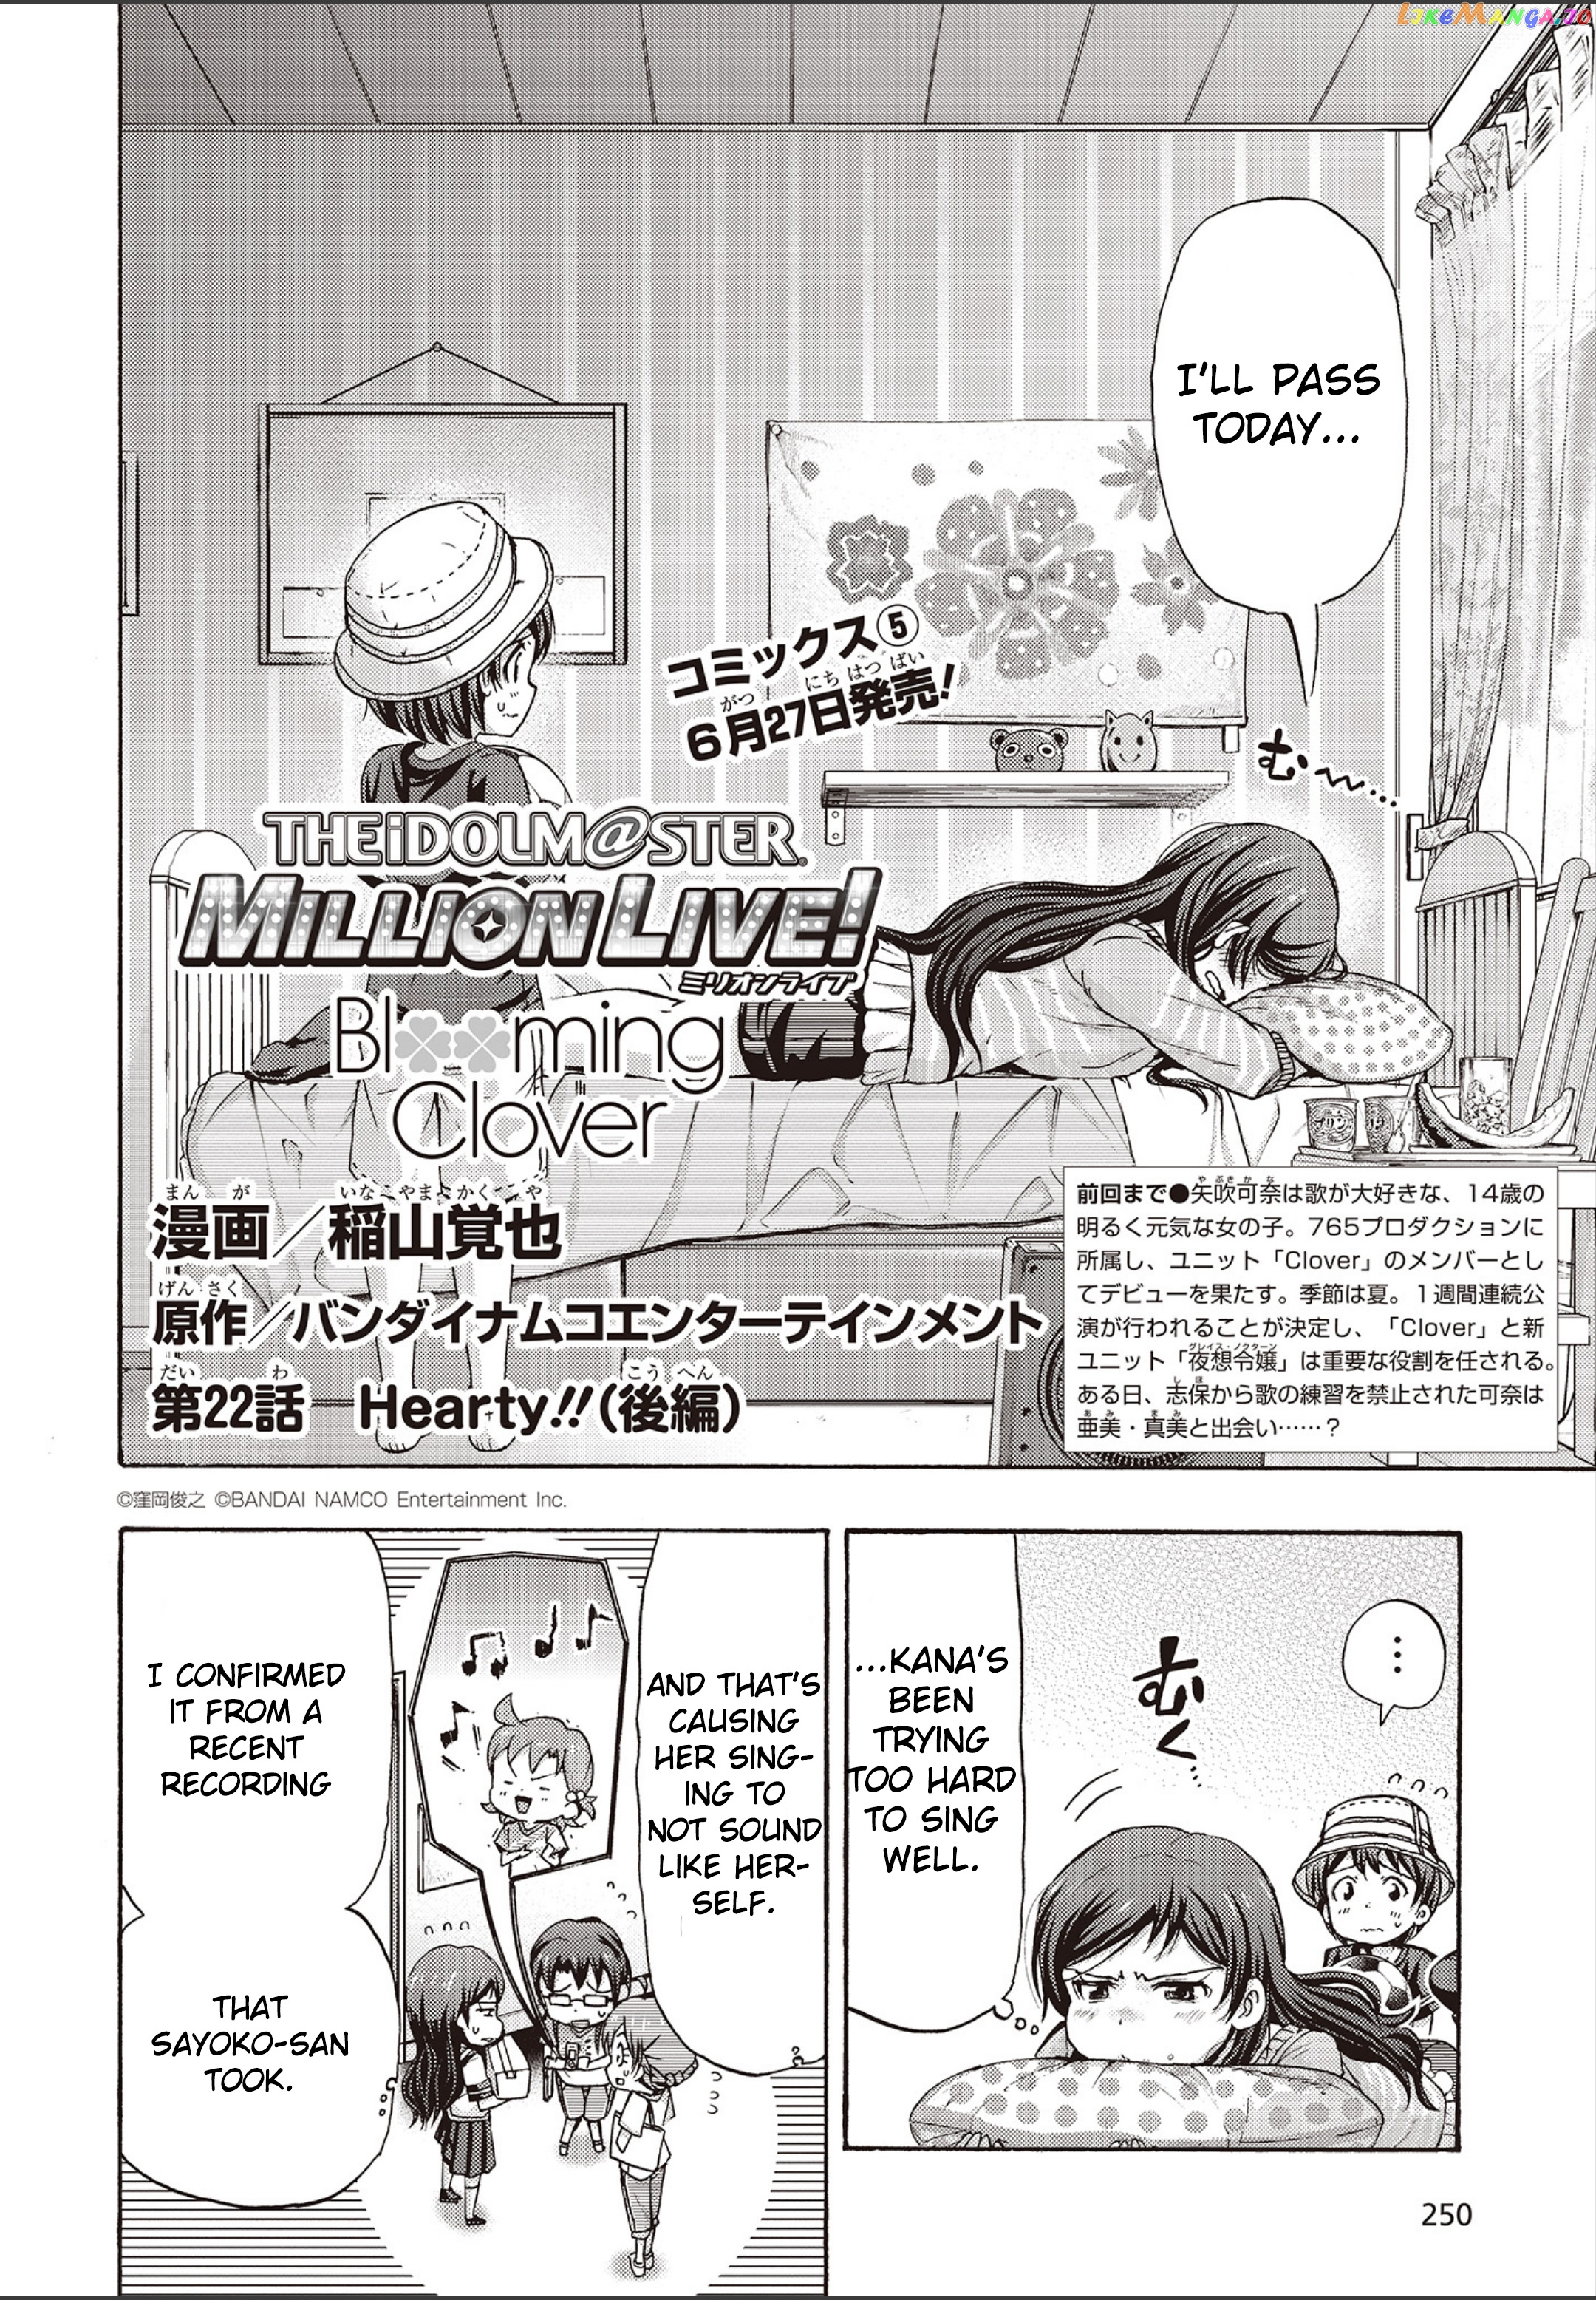 The [email protected] Million Live! Blooming Clover chapter 22 - page 2